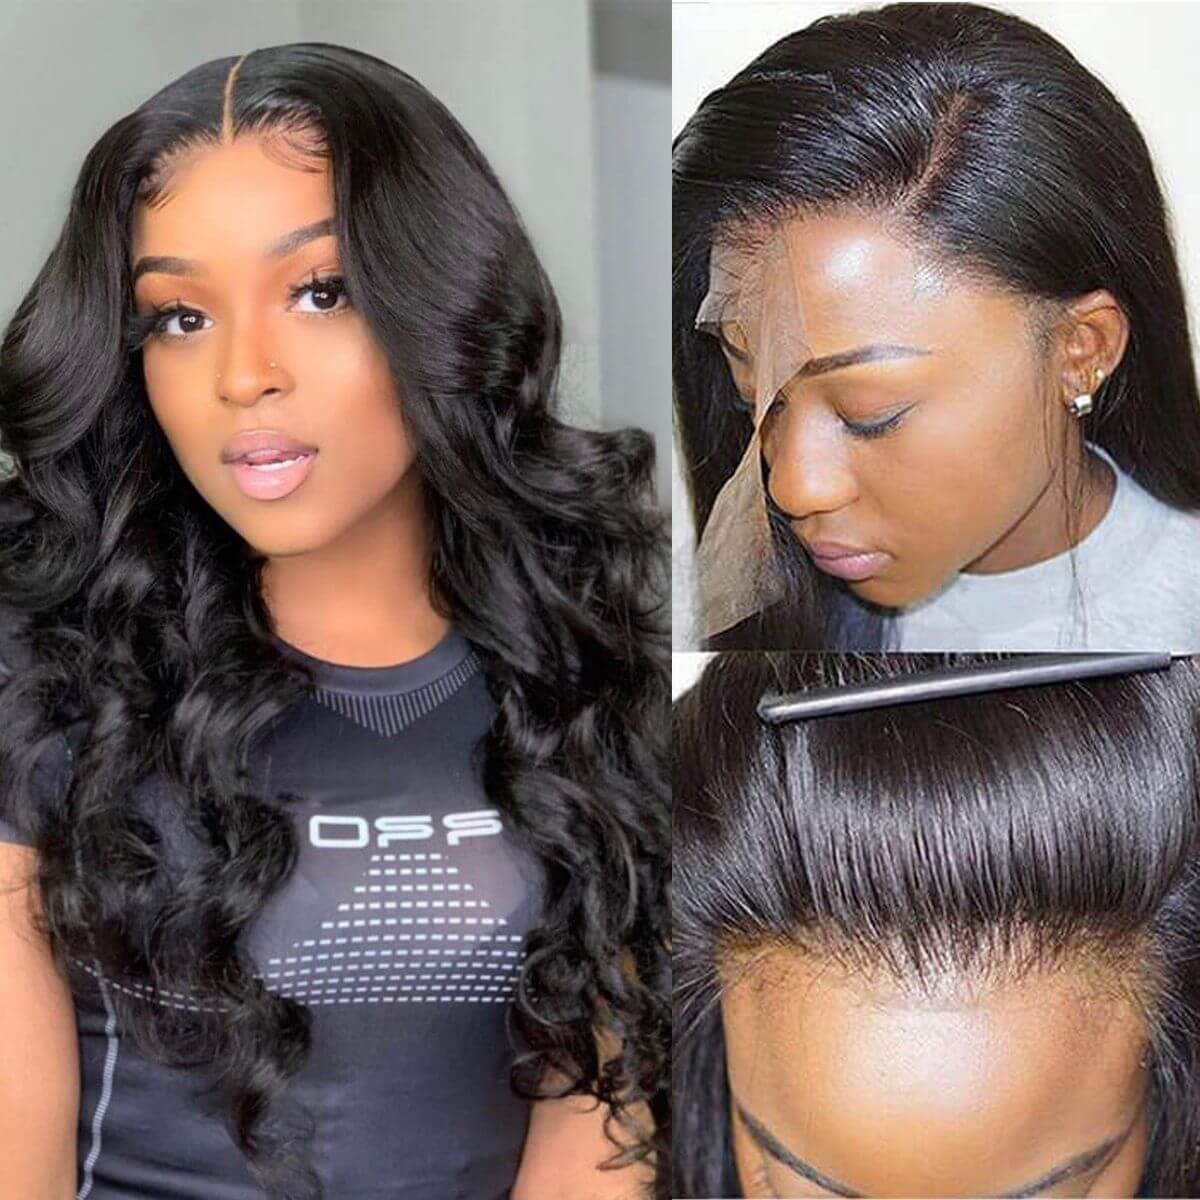 hd lace front wigs,hd lace body wave wigs,body wave hd lace wig,body wave hd lace front human hair wigs,body wave hd lace front wig,front lace wigs body wave,best hd lace front wigs,cheap hd lace front wigs